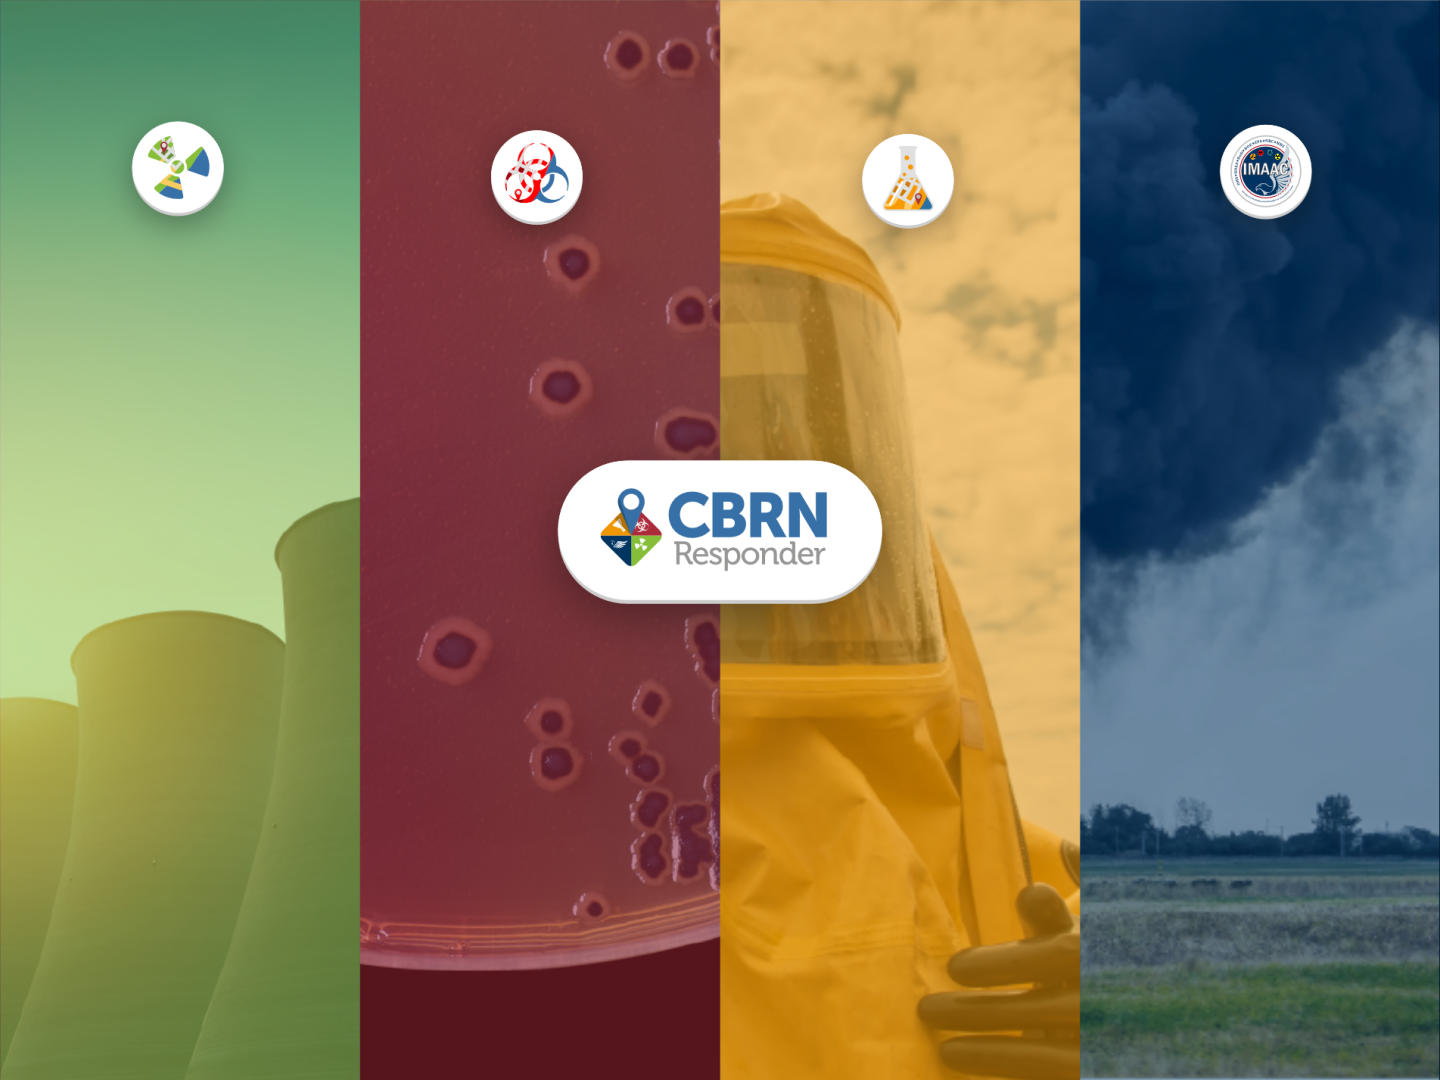 Nuclear, biological, chemical and IMAAC icons on a multicolor background. CBRN Responder logo in center.